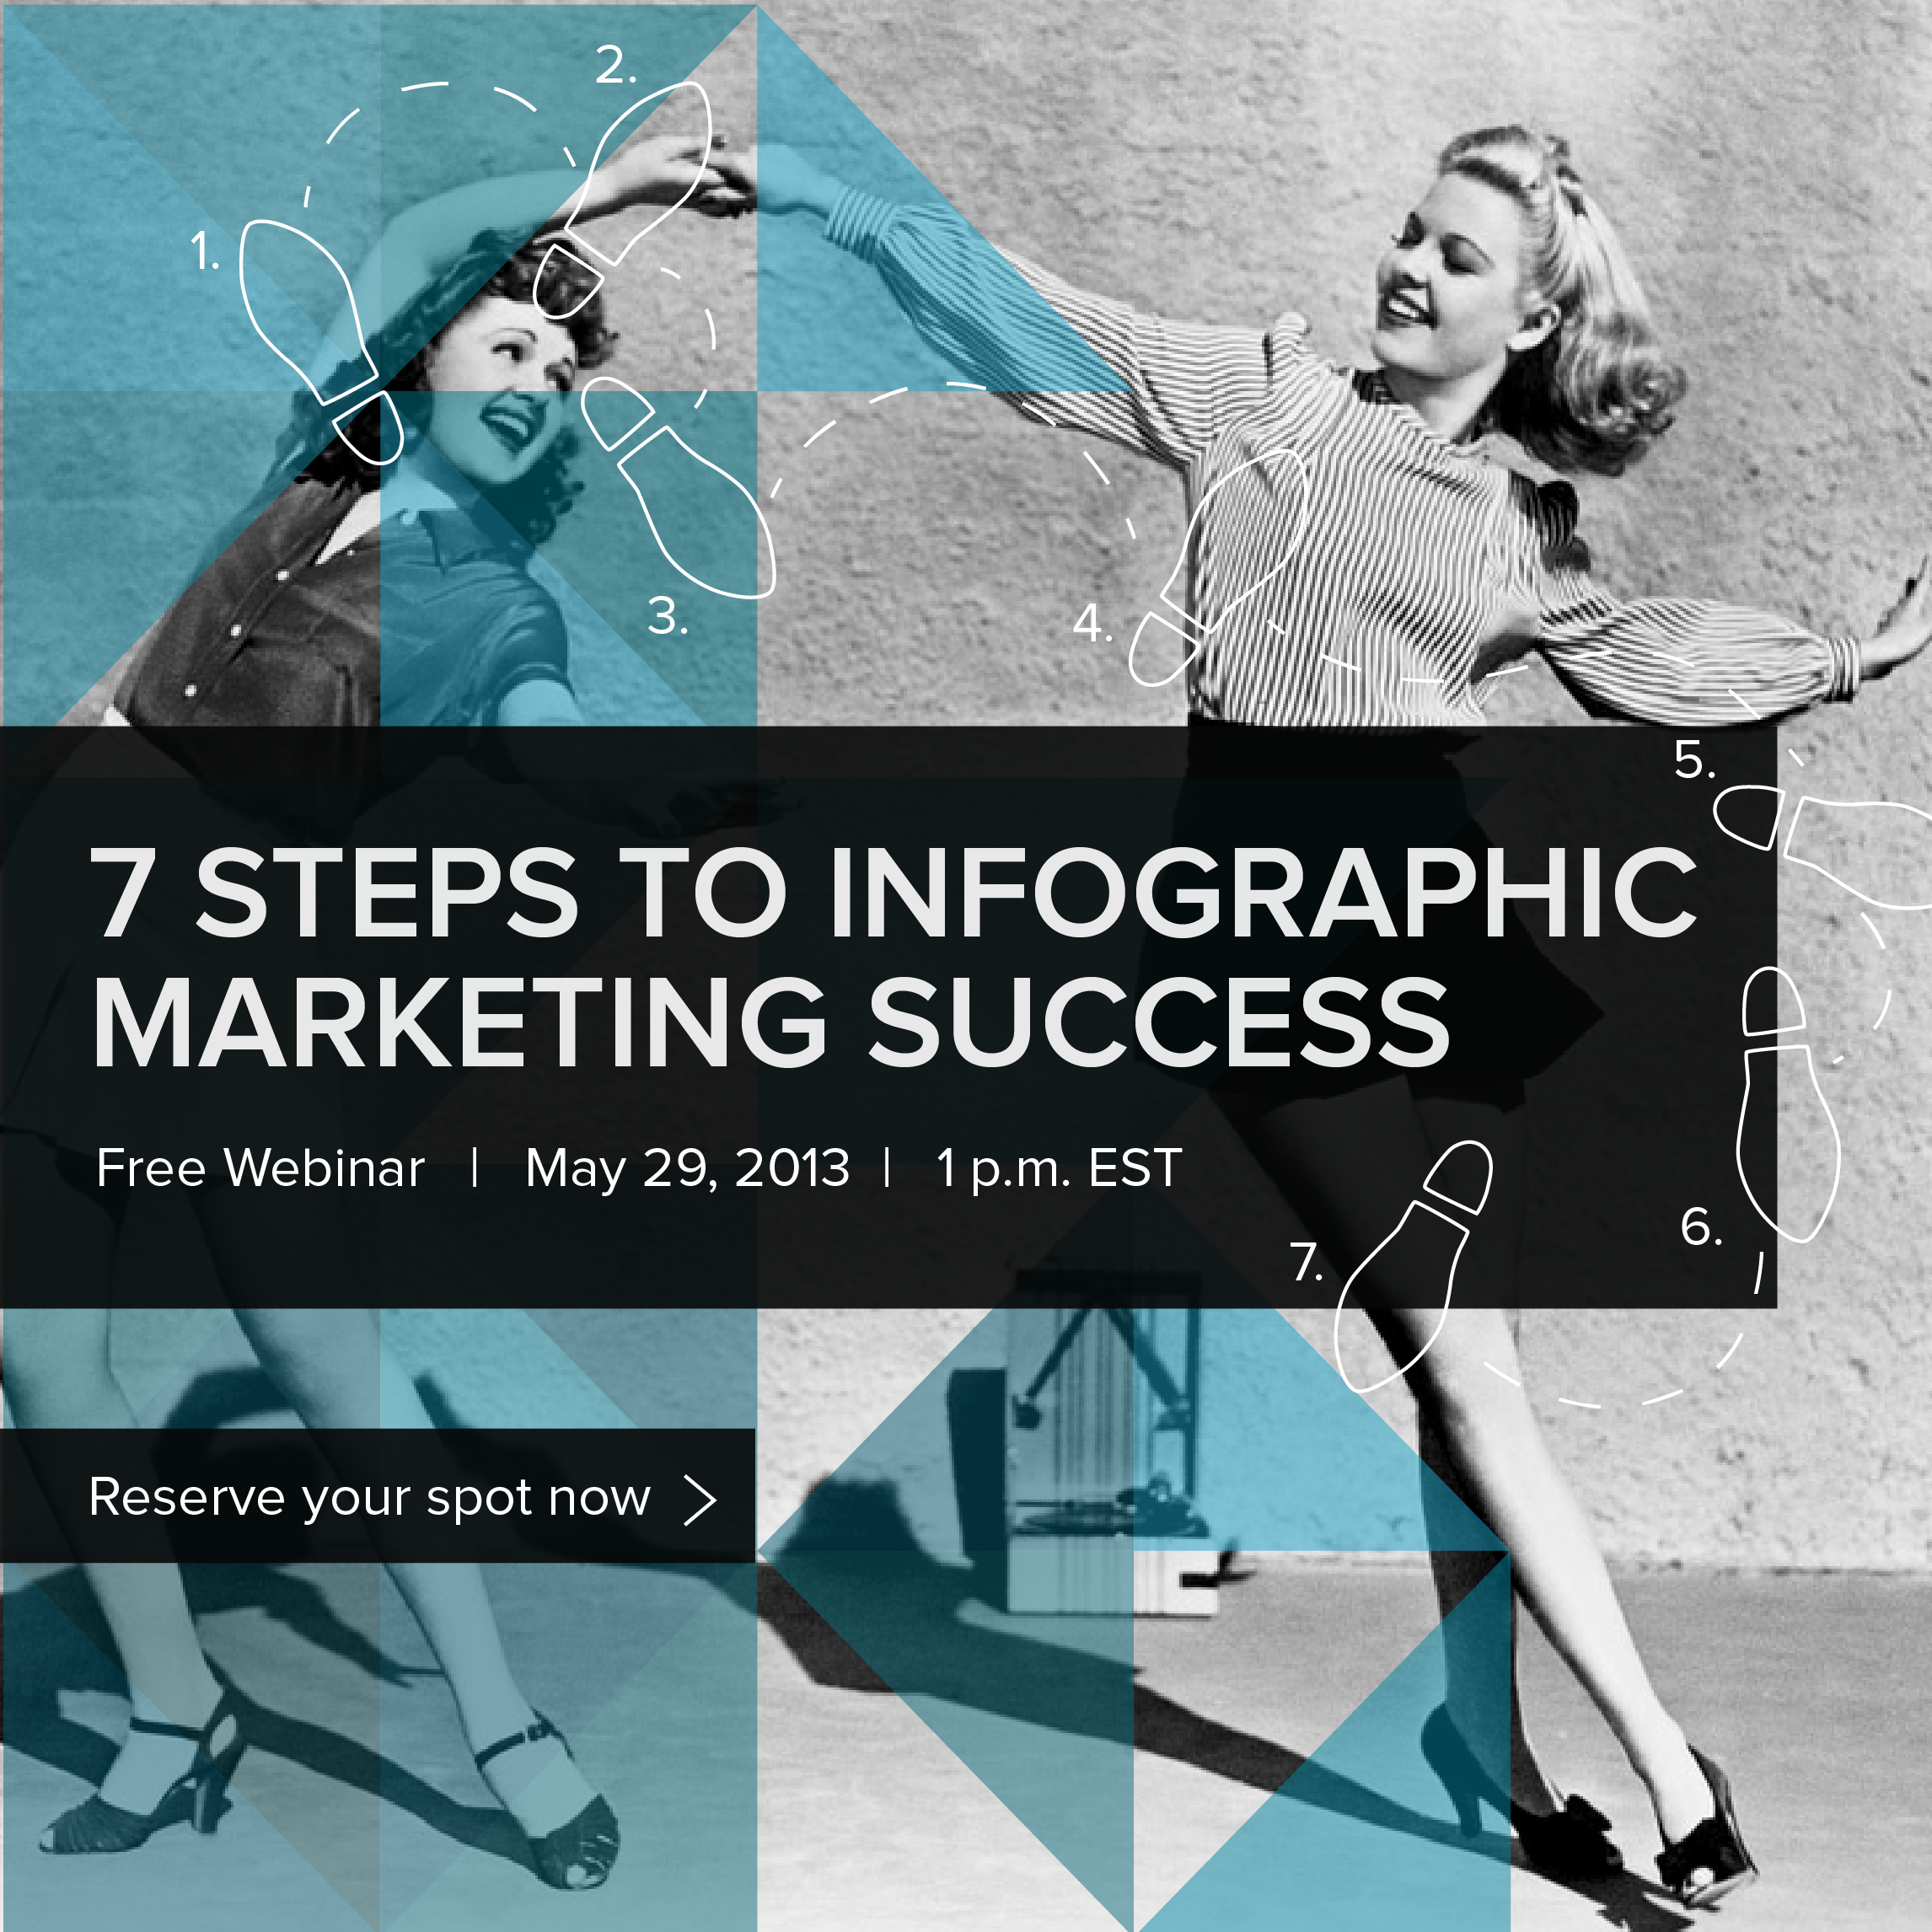 7 Steps to infographic marketing success